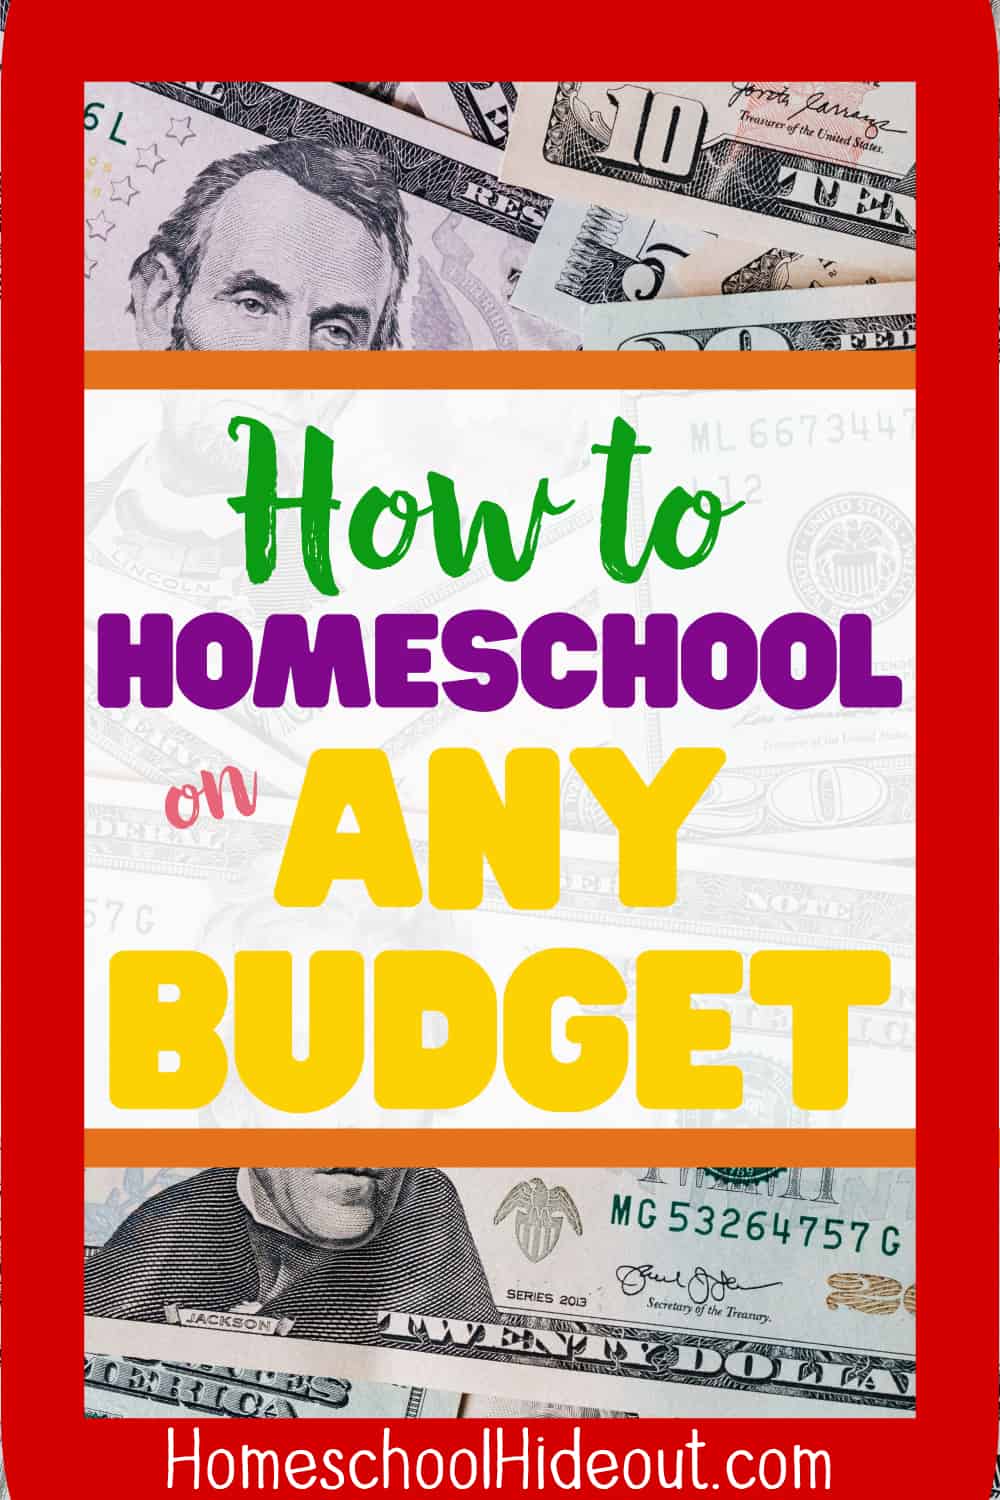 You don't have to be rich! You can homeschool on any budget, whether big or small. We've done it as a family of 5 living on less than $30,000 a year!